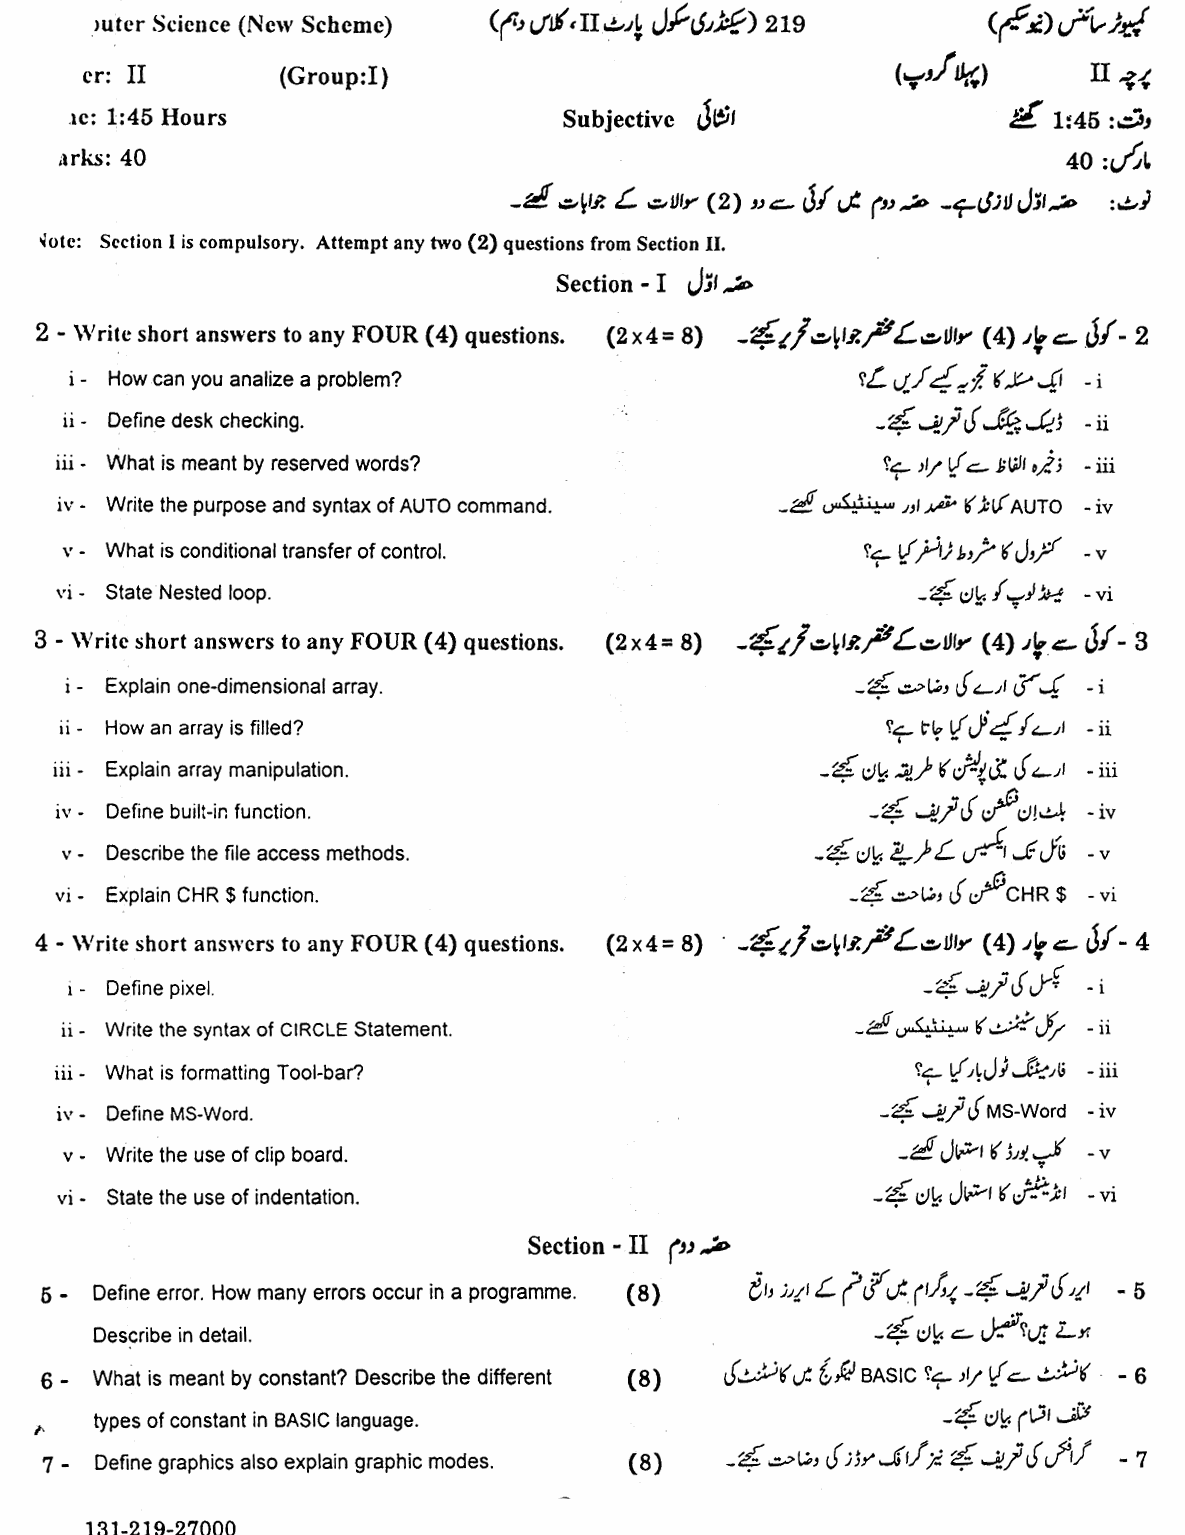 10th Class Computer Science Paper 2019 Gujranwala Board Subjective Group 1